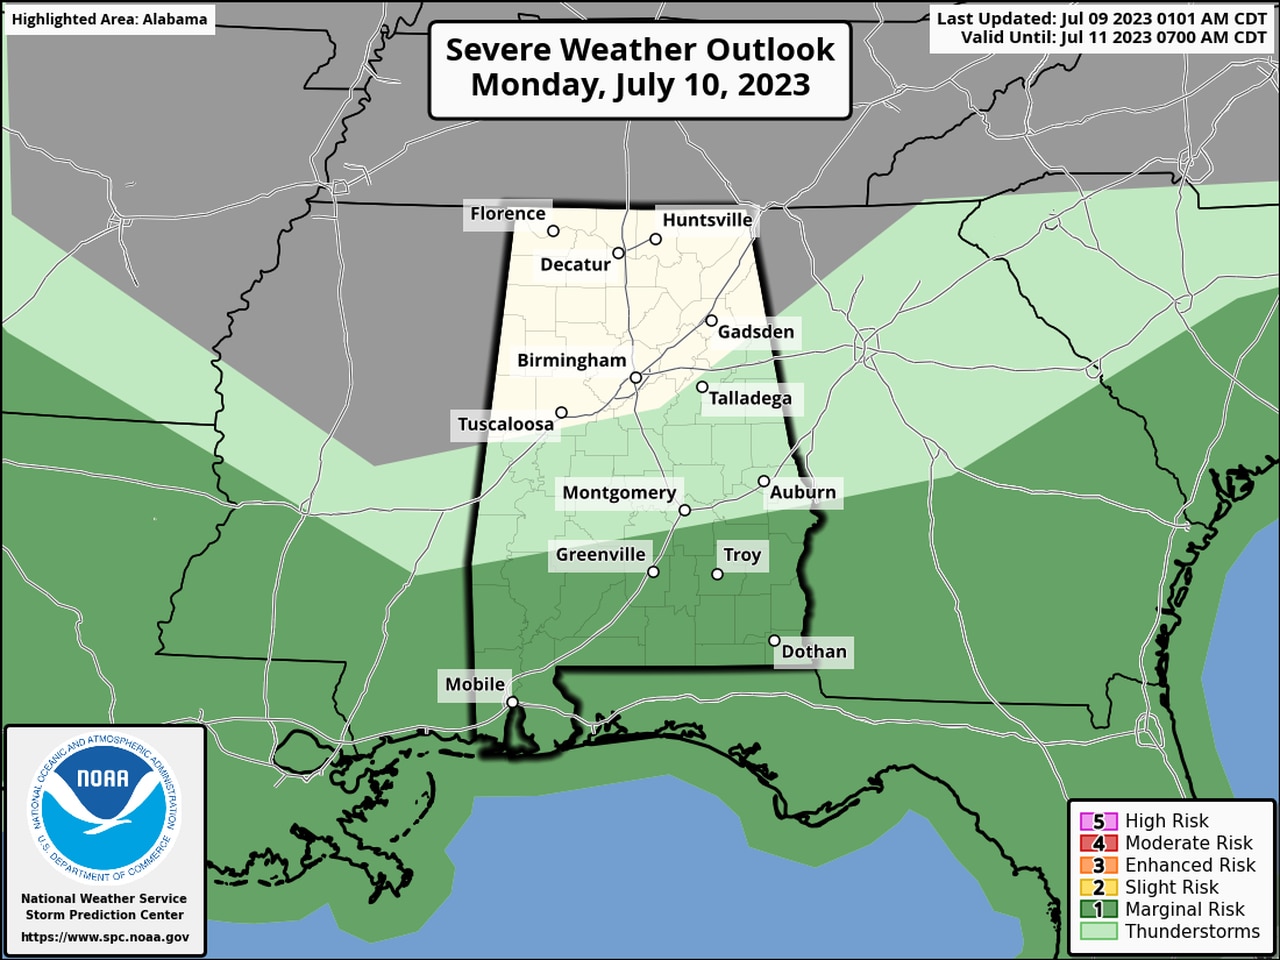 Scattered severe storms possible Sunday in Alabama